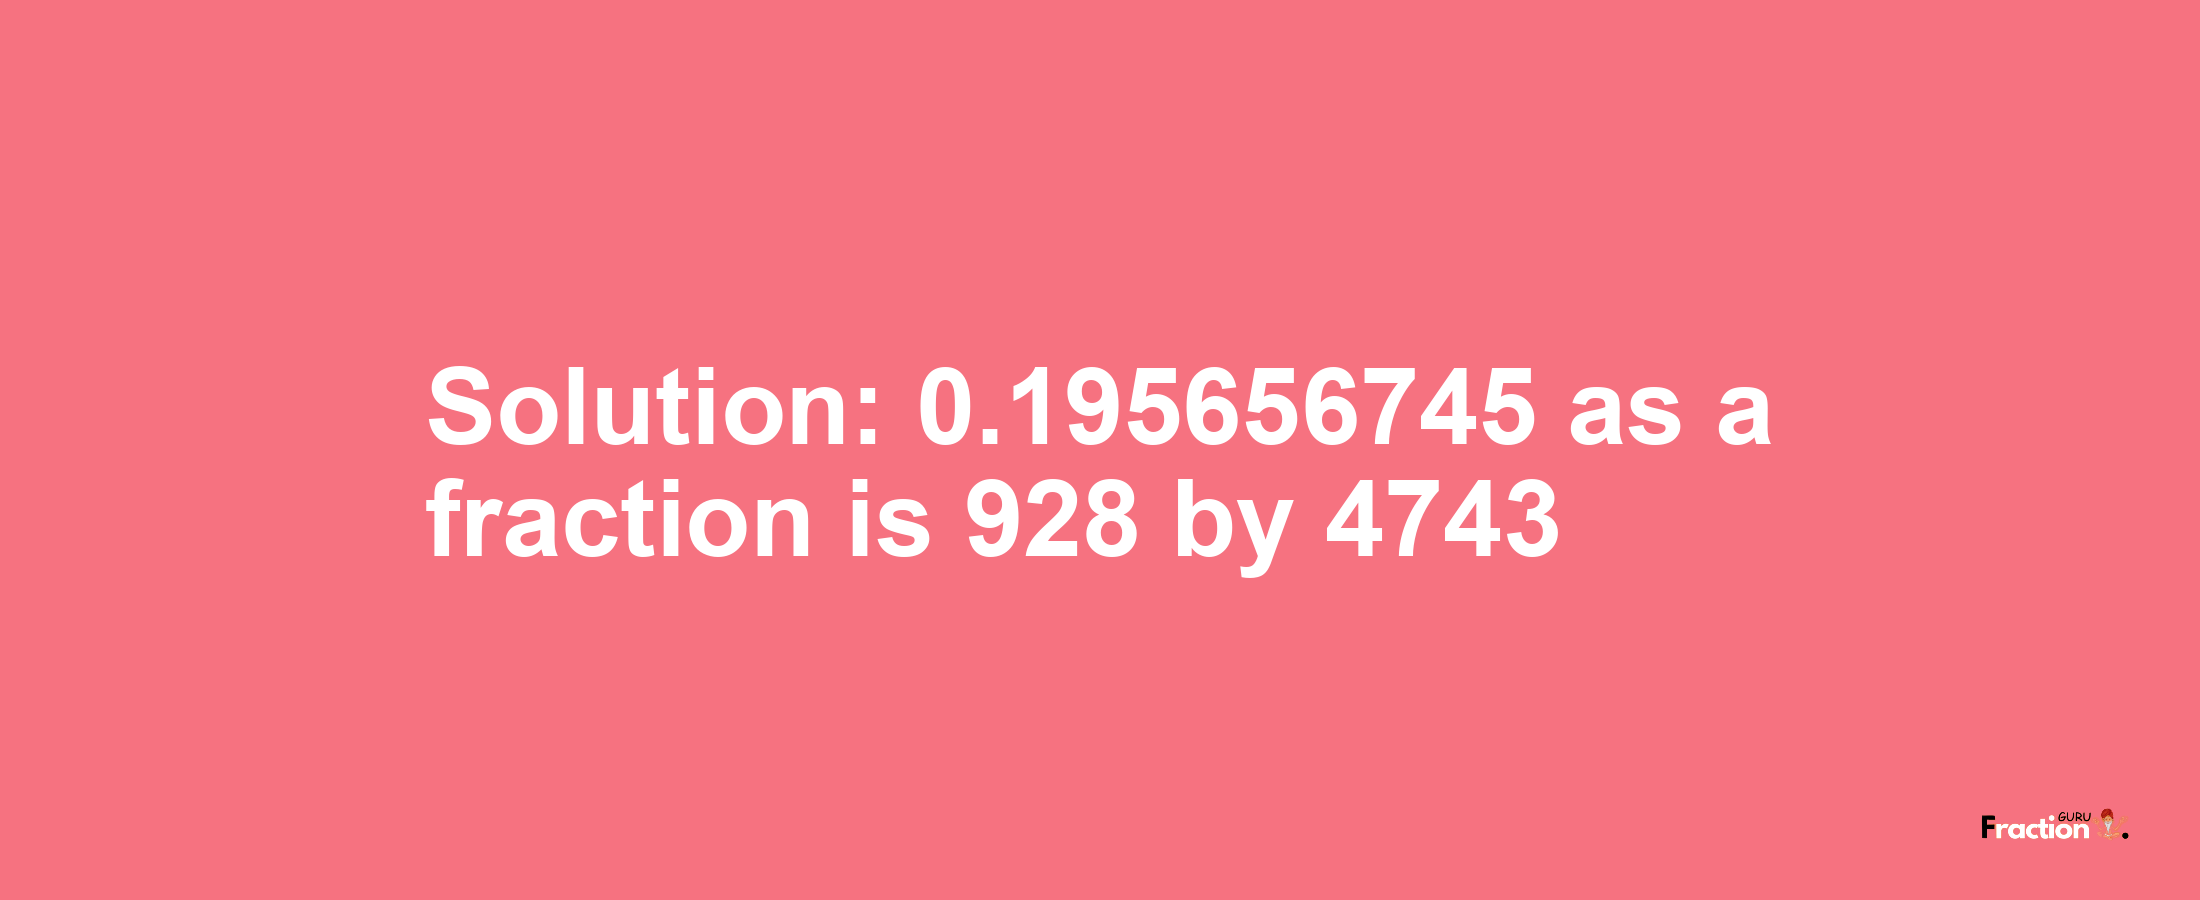 Solution:0.195656745 as a fraction is 928/4743